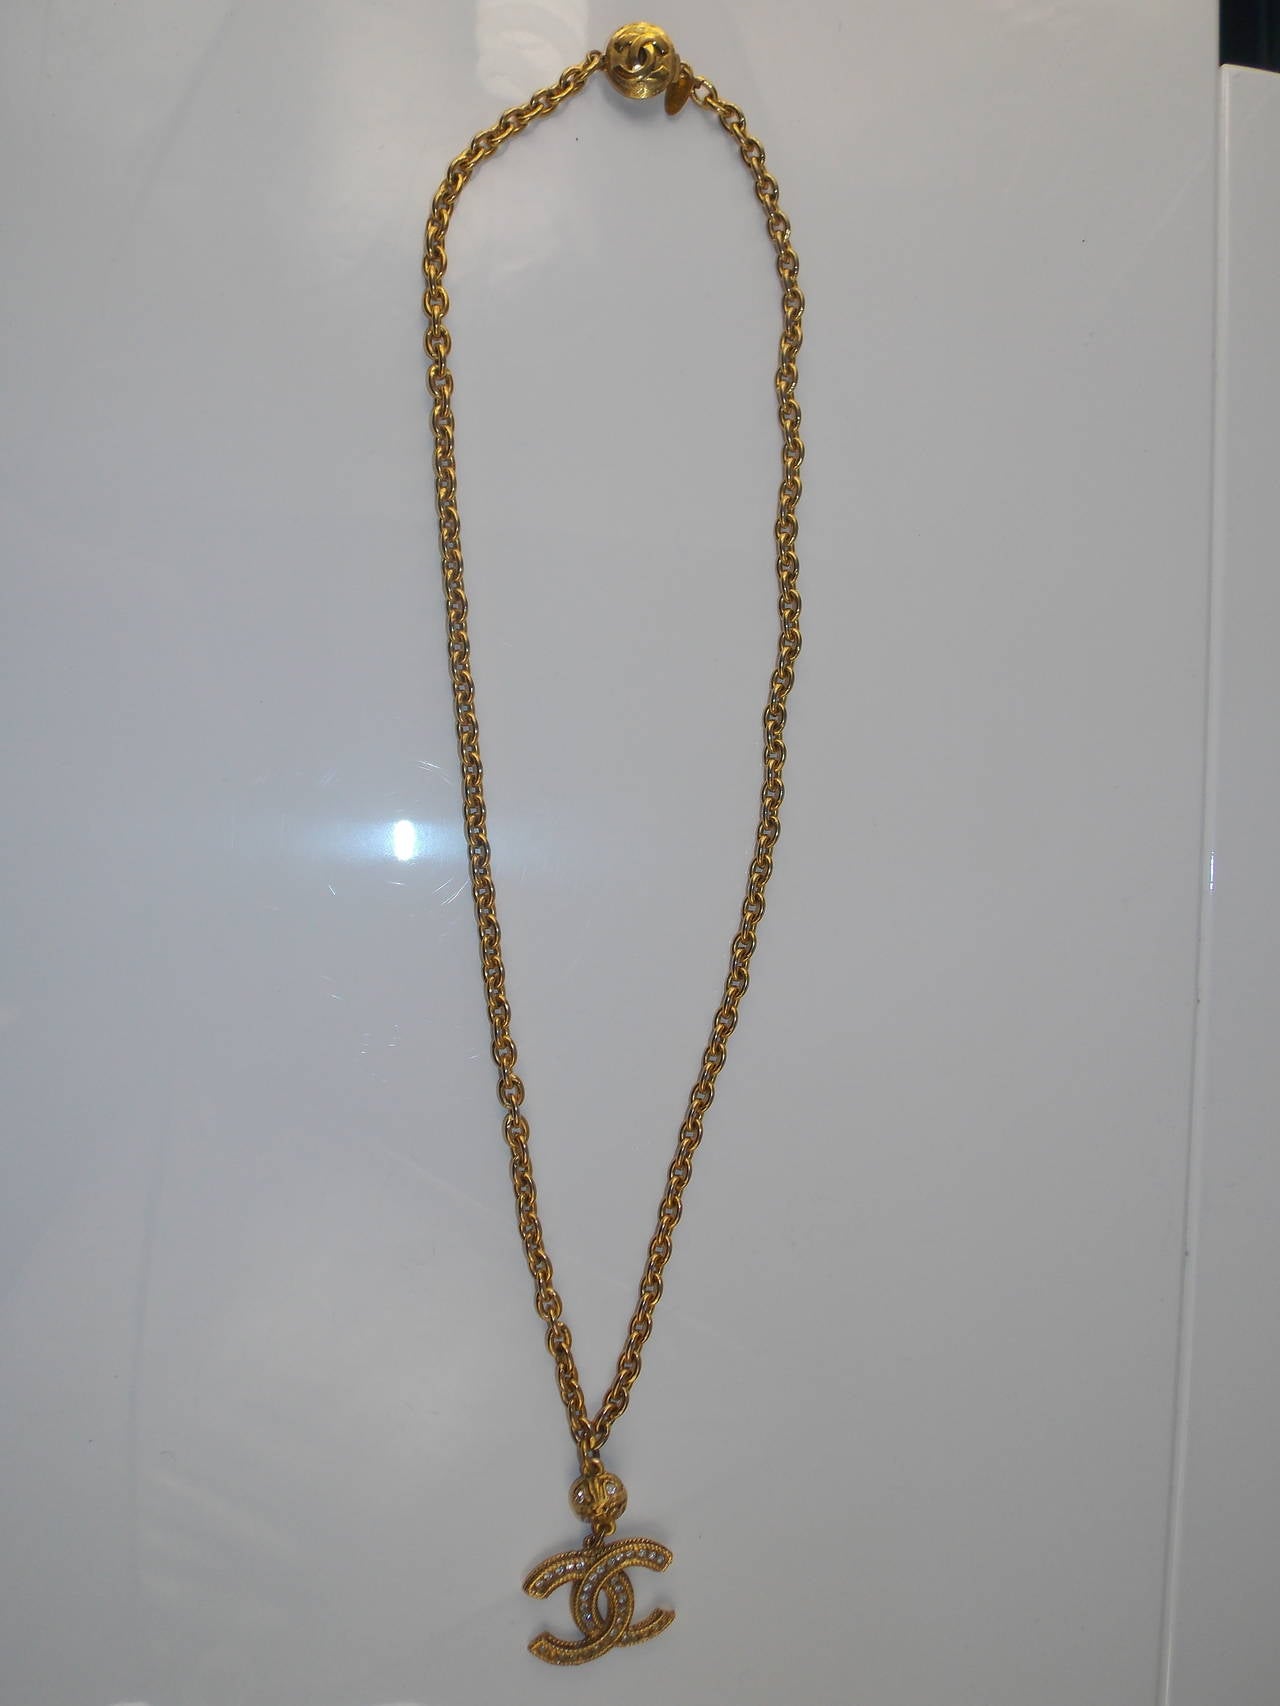 Chanel gold chain rope necklace with crystal CC logo pendant.